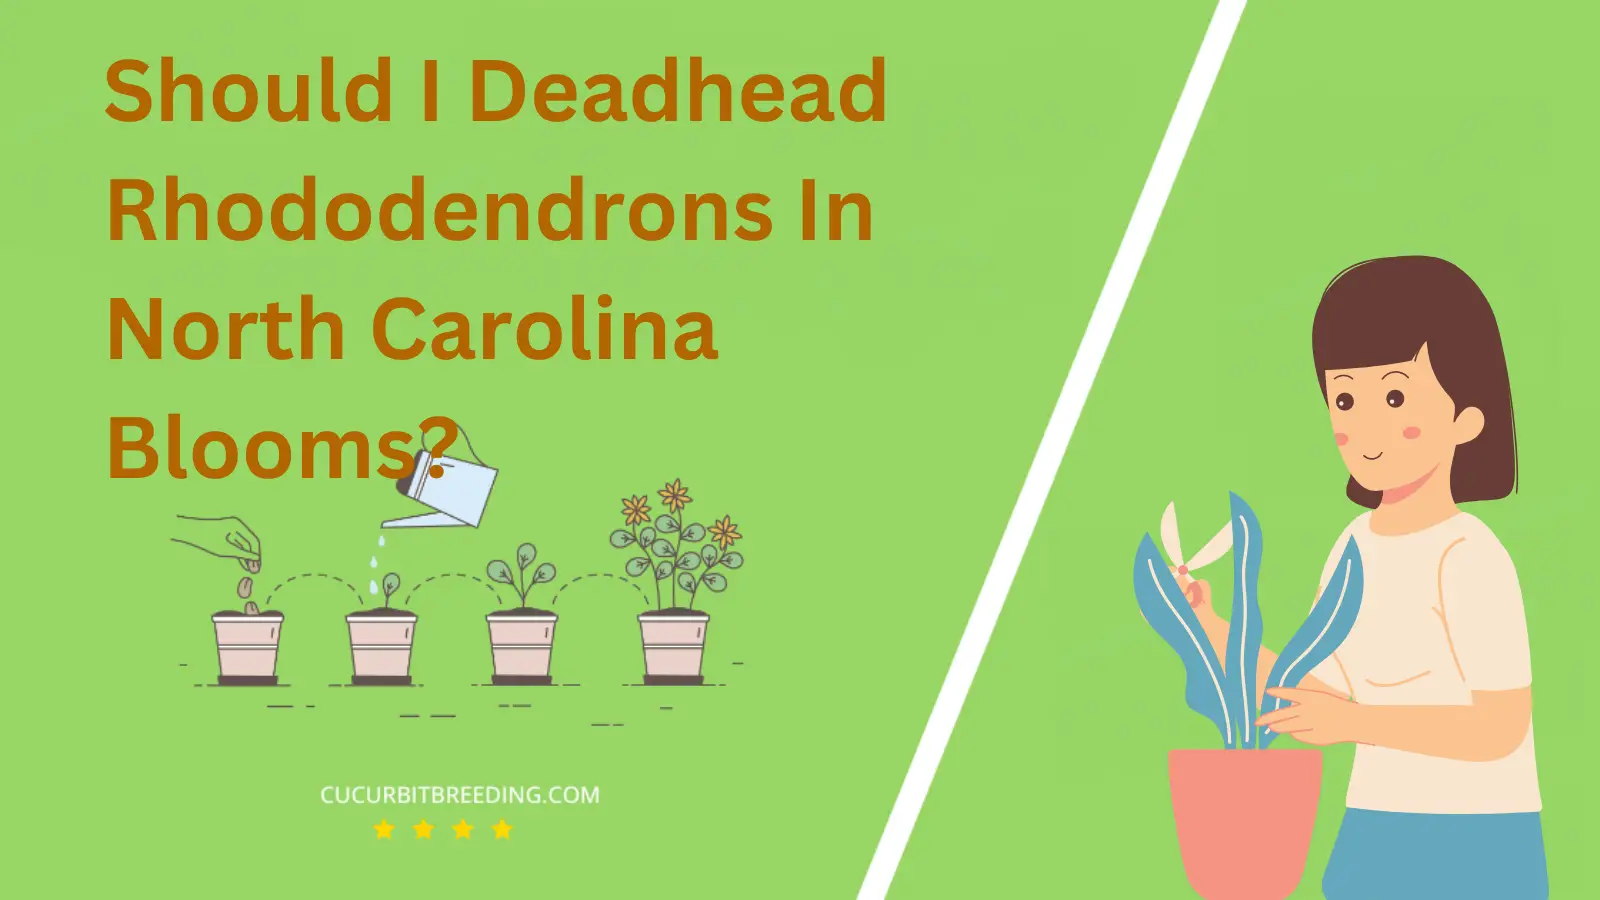 Should I Deadhead Rhododendrons In North Carolina Blooms?